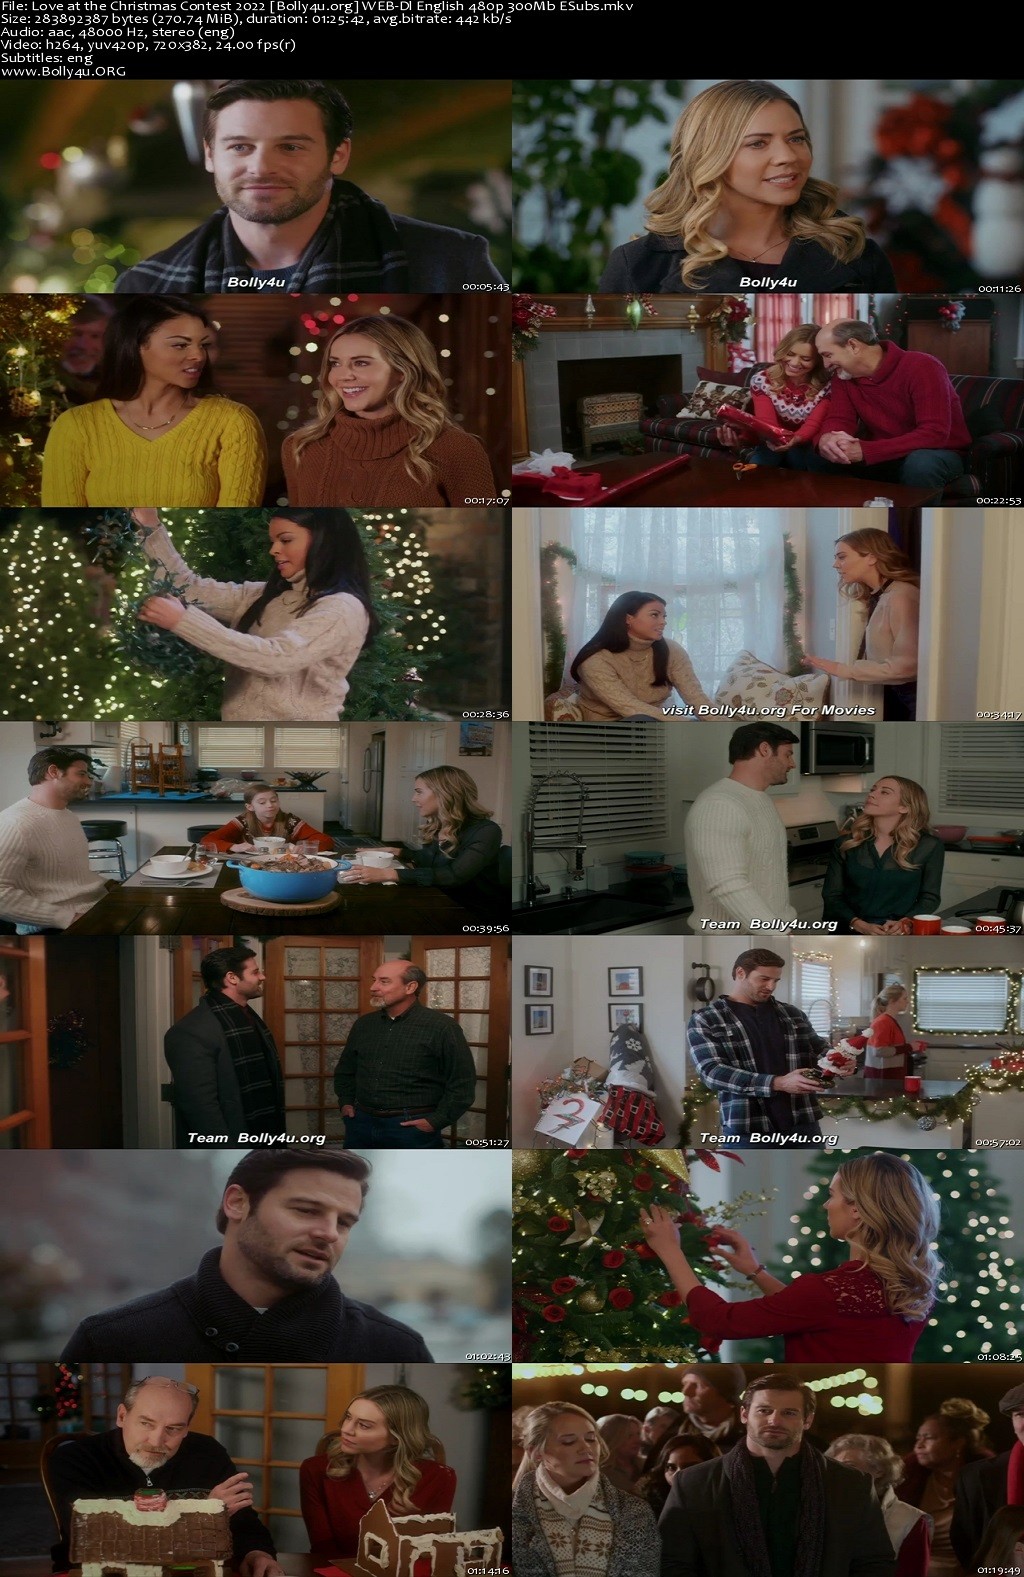 18+ Love at the Christmas Contest 2022 WEB-DL English Full Movie Download 720p 480p